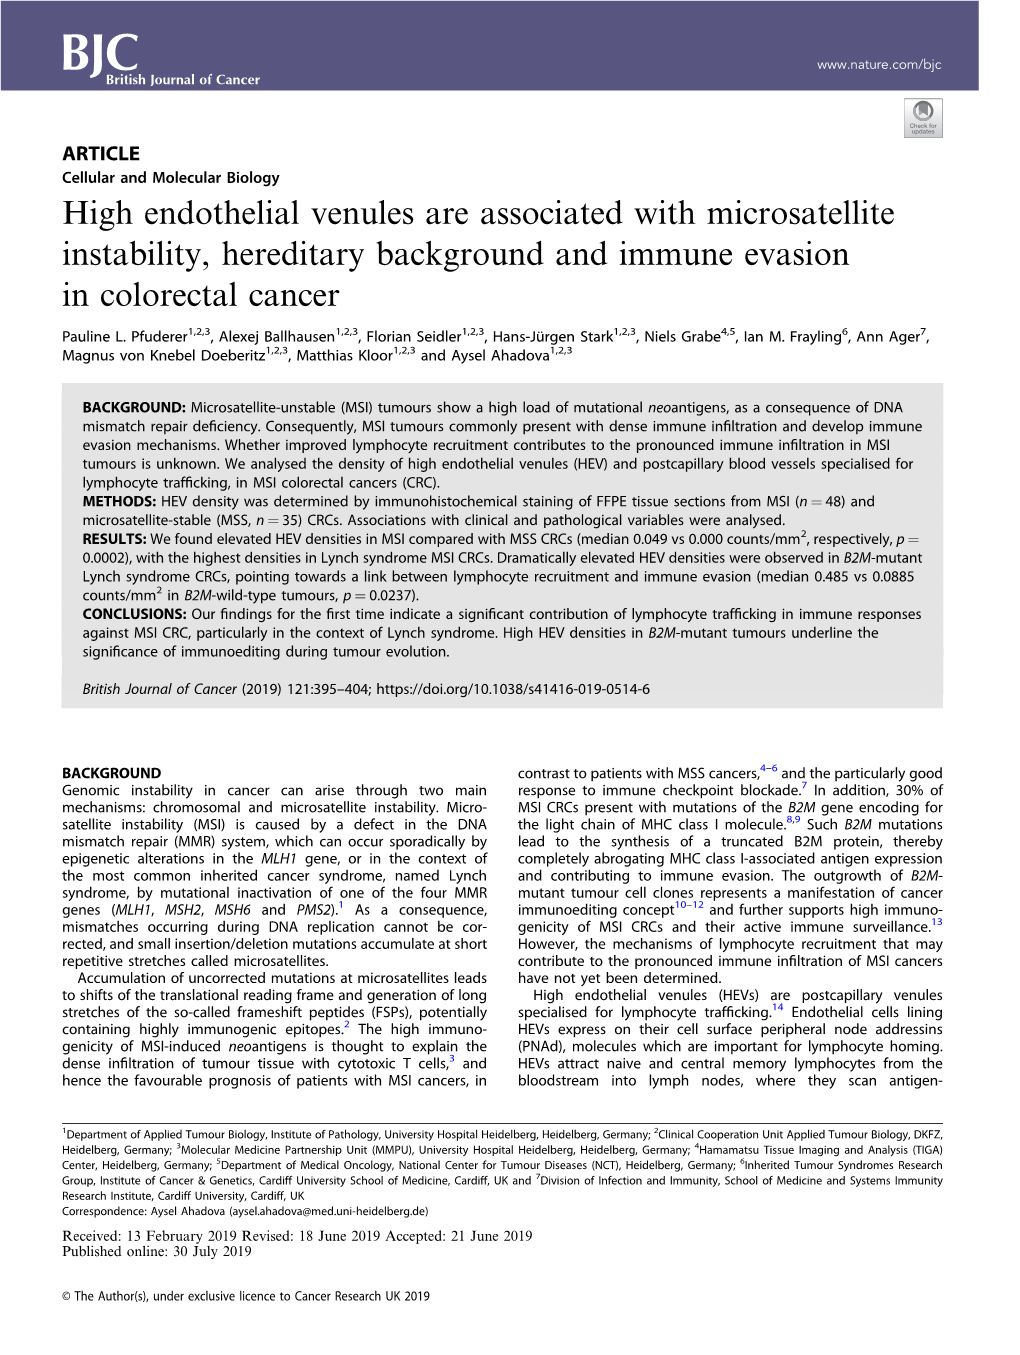 High Endothelial Venules Are Associated with Microsatellite Instability, Hereditary Background and Immune Evasion in Colorectal Cancer